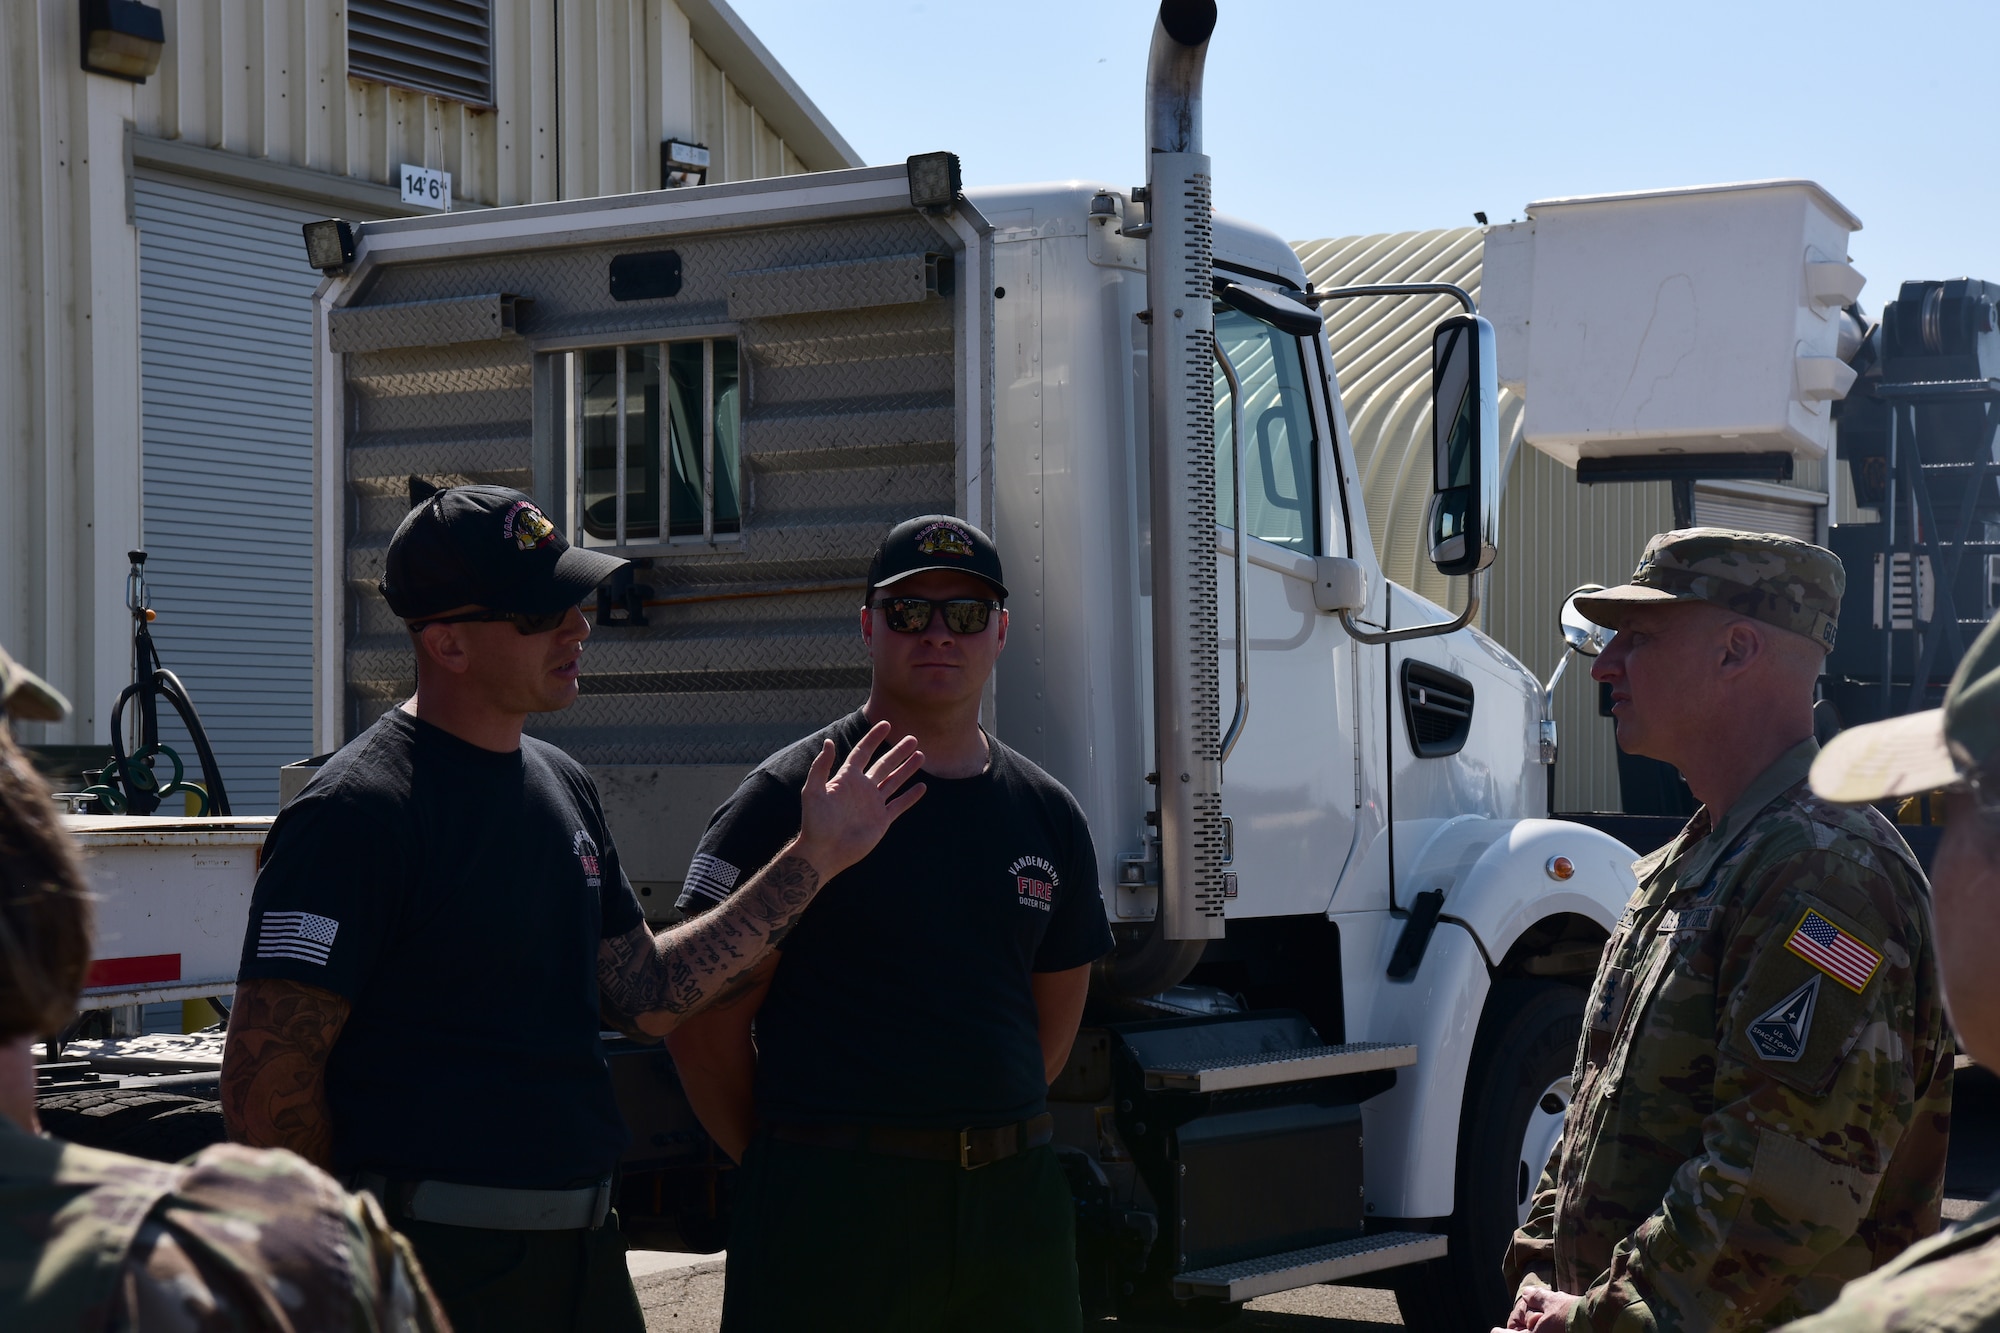 Lt. Gen. Michael Guetlein spoke with Vandenberg Fire Dozer team during his visit Oct. 6, 2021 on Vandenberg Space Force Base, Calif. (U.S. Space Force photo by Airman First Class Tiarra Sibley)